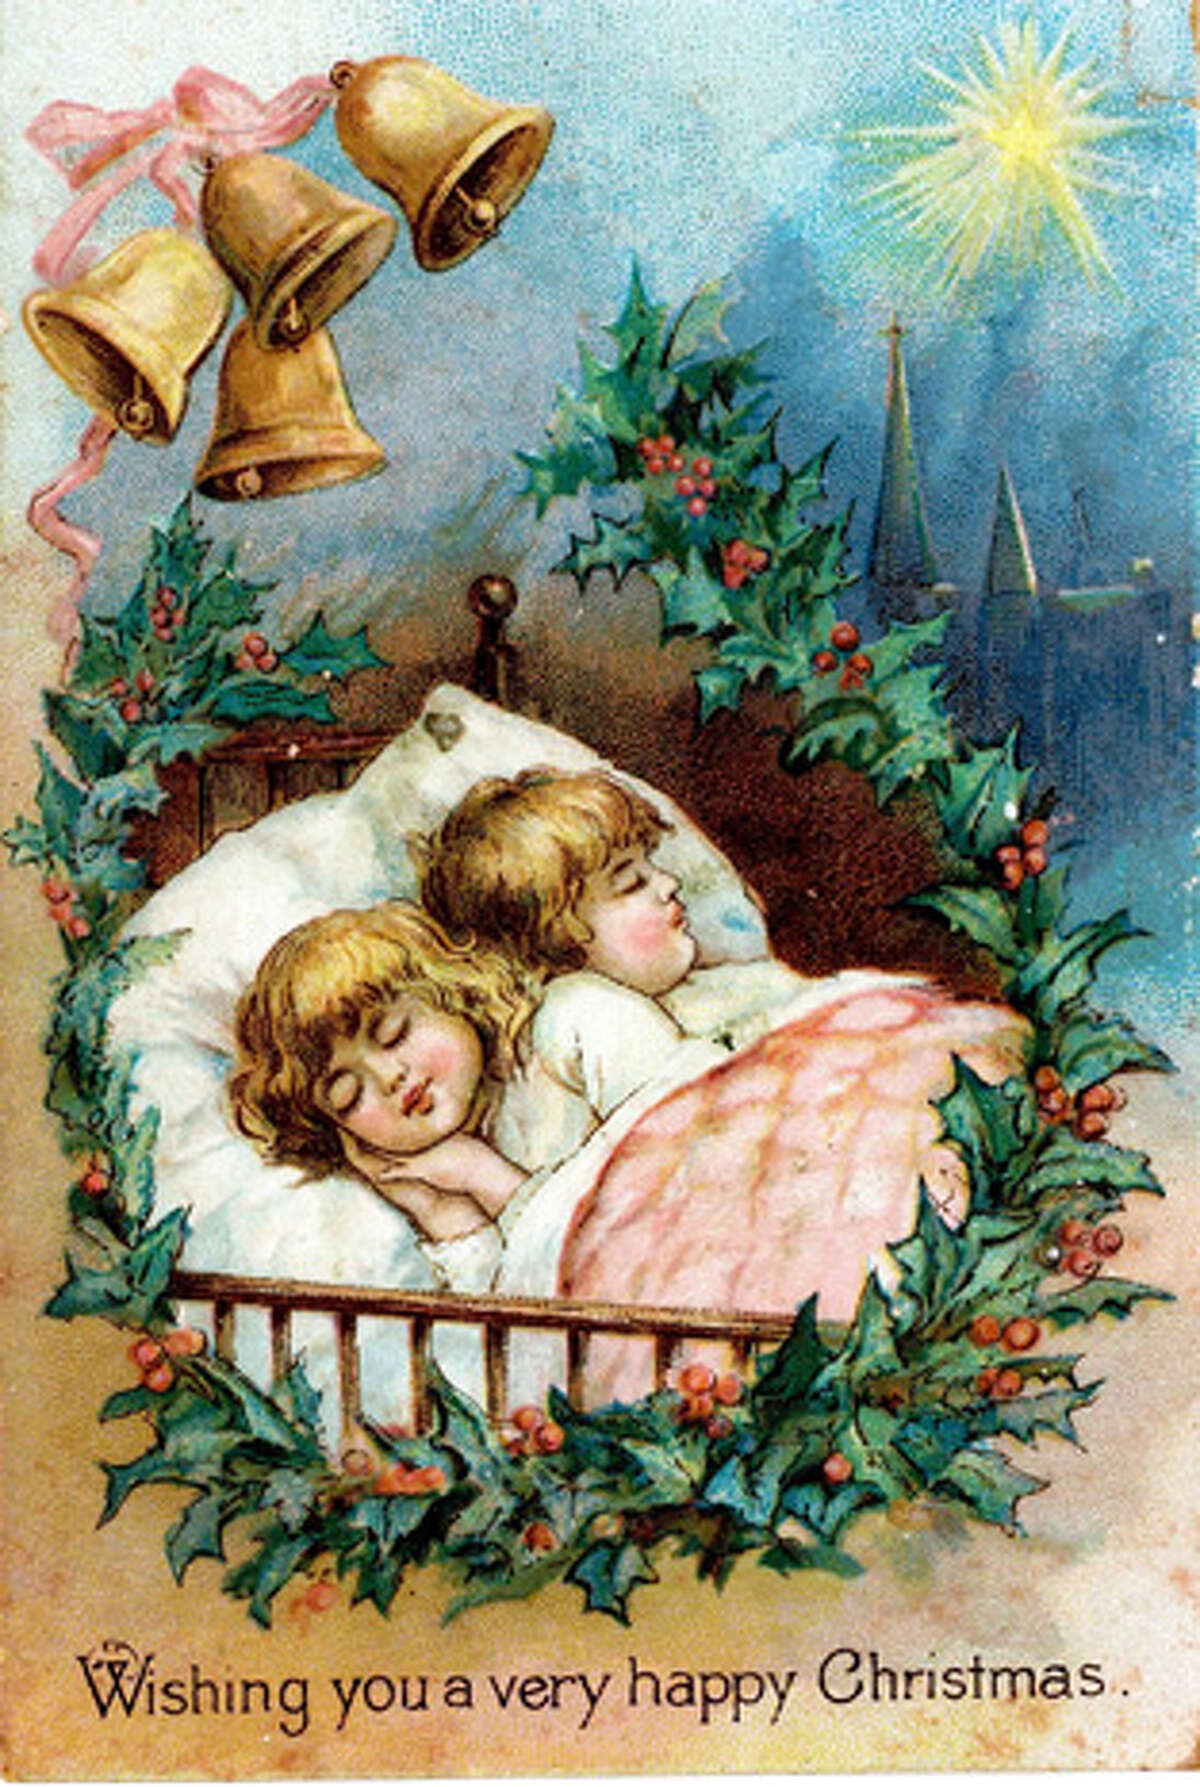 50 vintage Christmas cards we'd still love to receive today